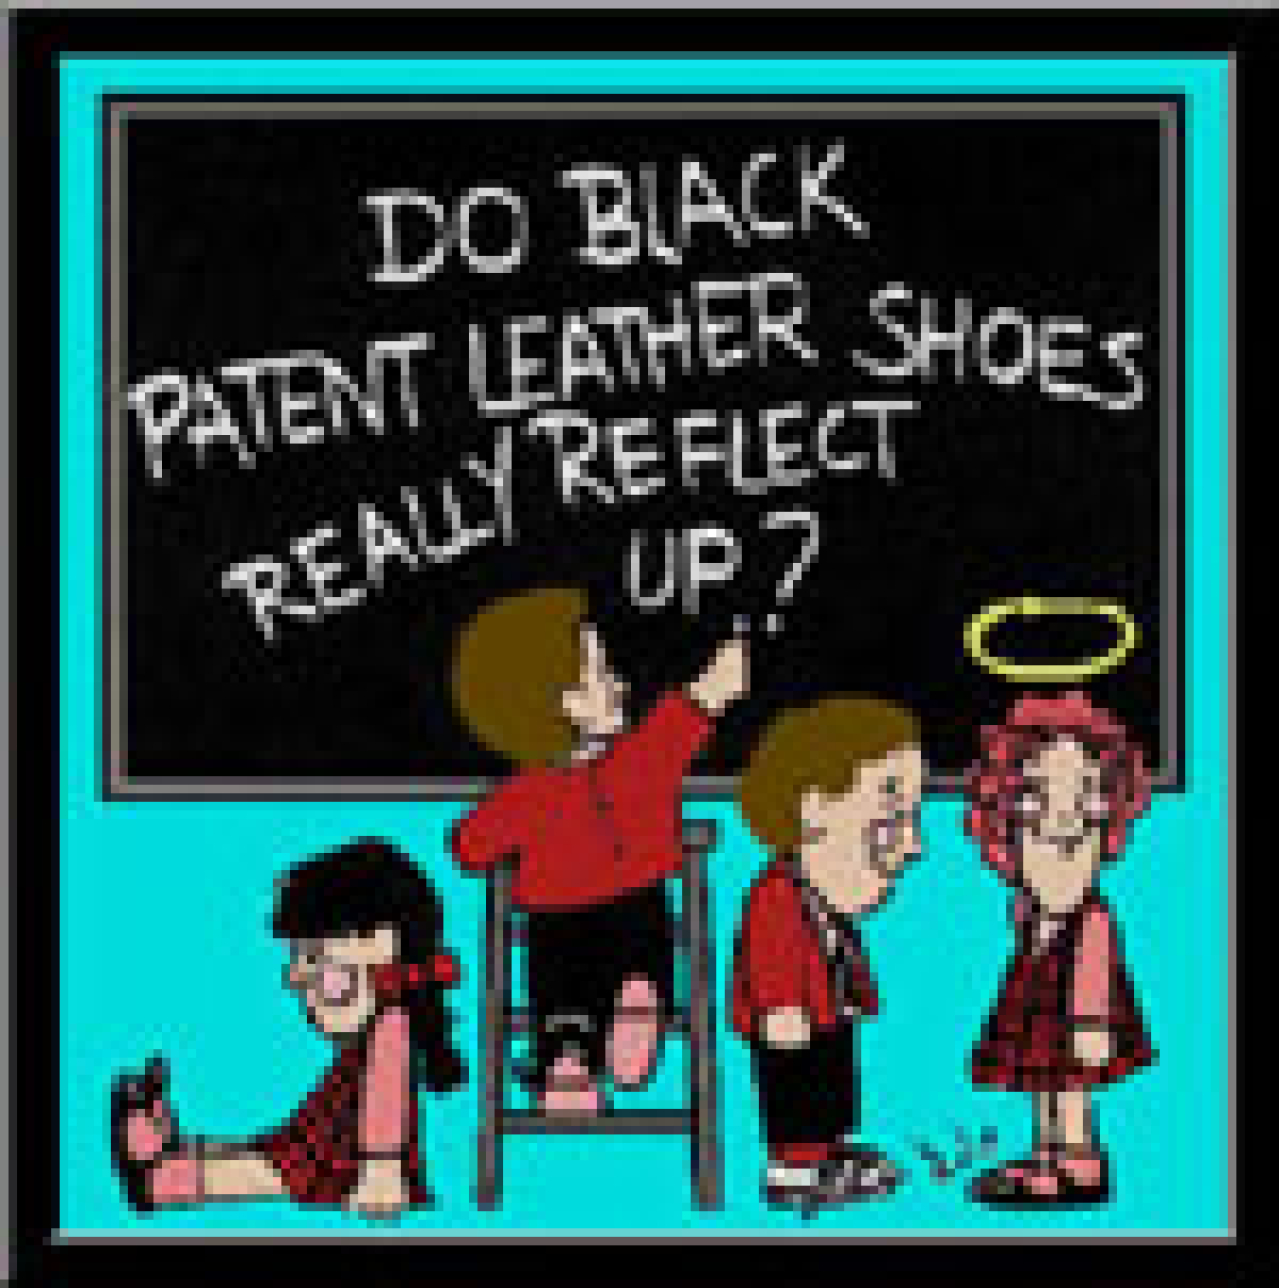 do black patent leather shoes really reflect up logo 369